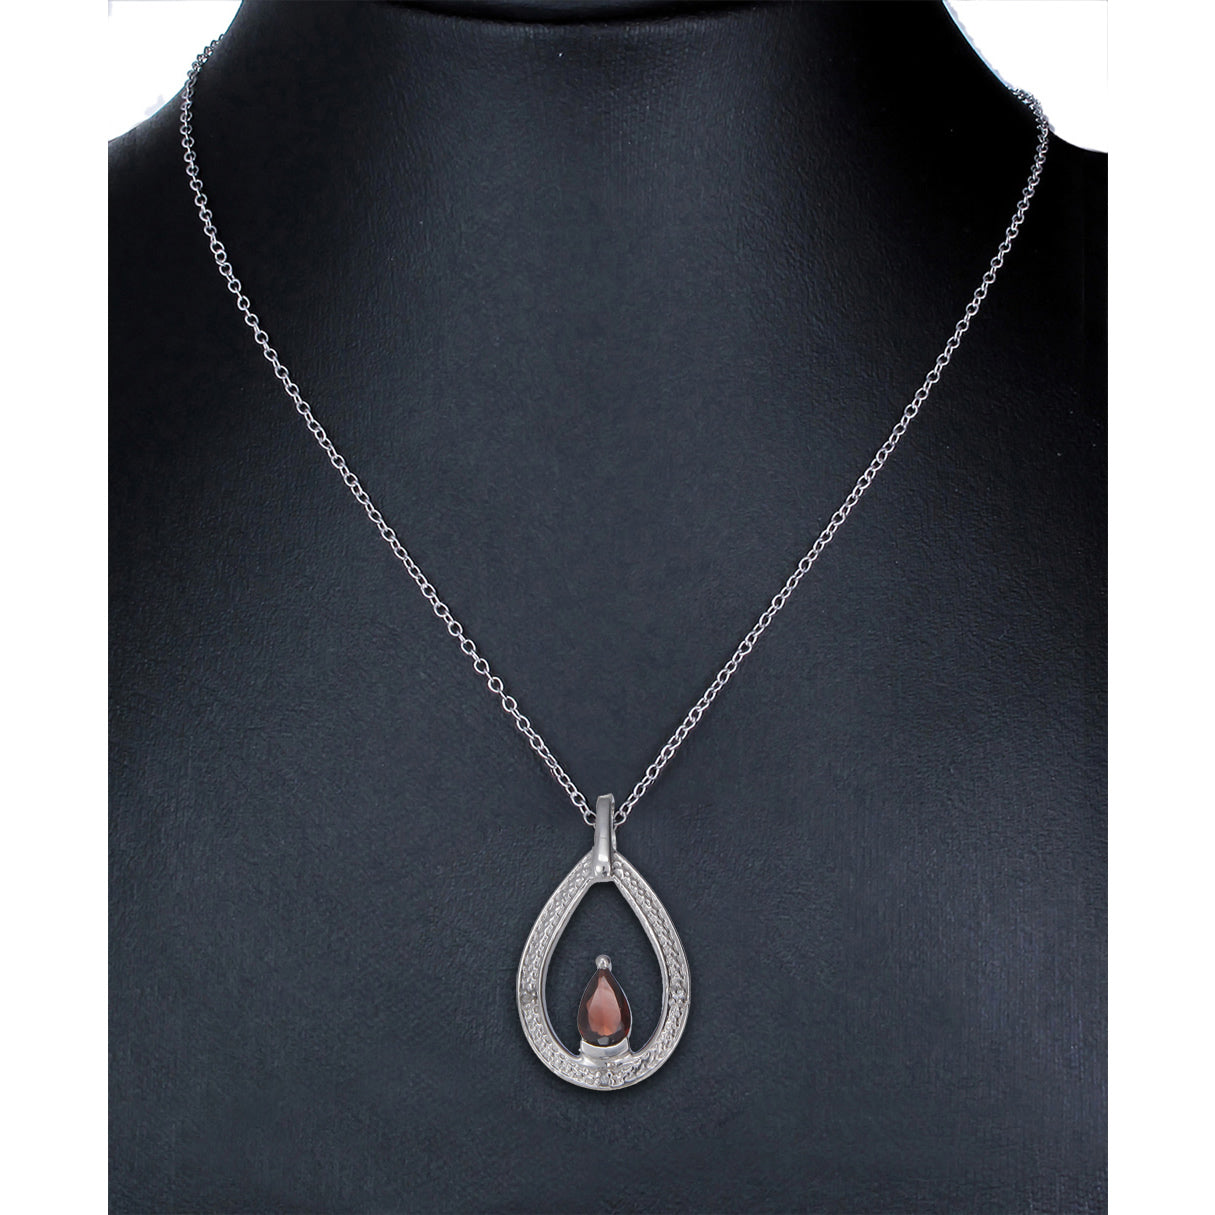 0.72 cttw Pendant Necklace, Diamond and Garnet Pear Pendant Necklace for Women in .925 Sterling Silver with Rhodium, 18 Inch Chain, Prong Setting